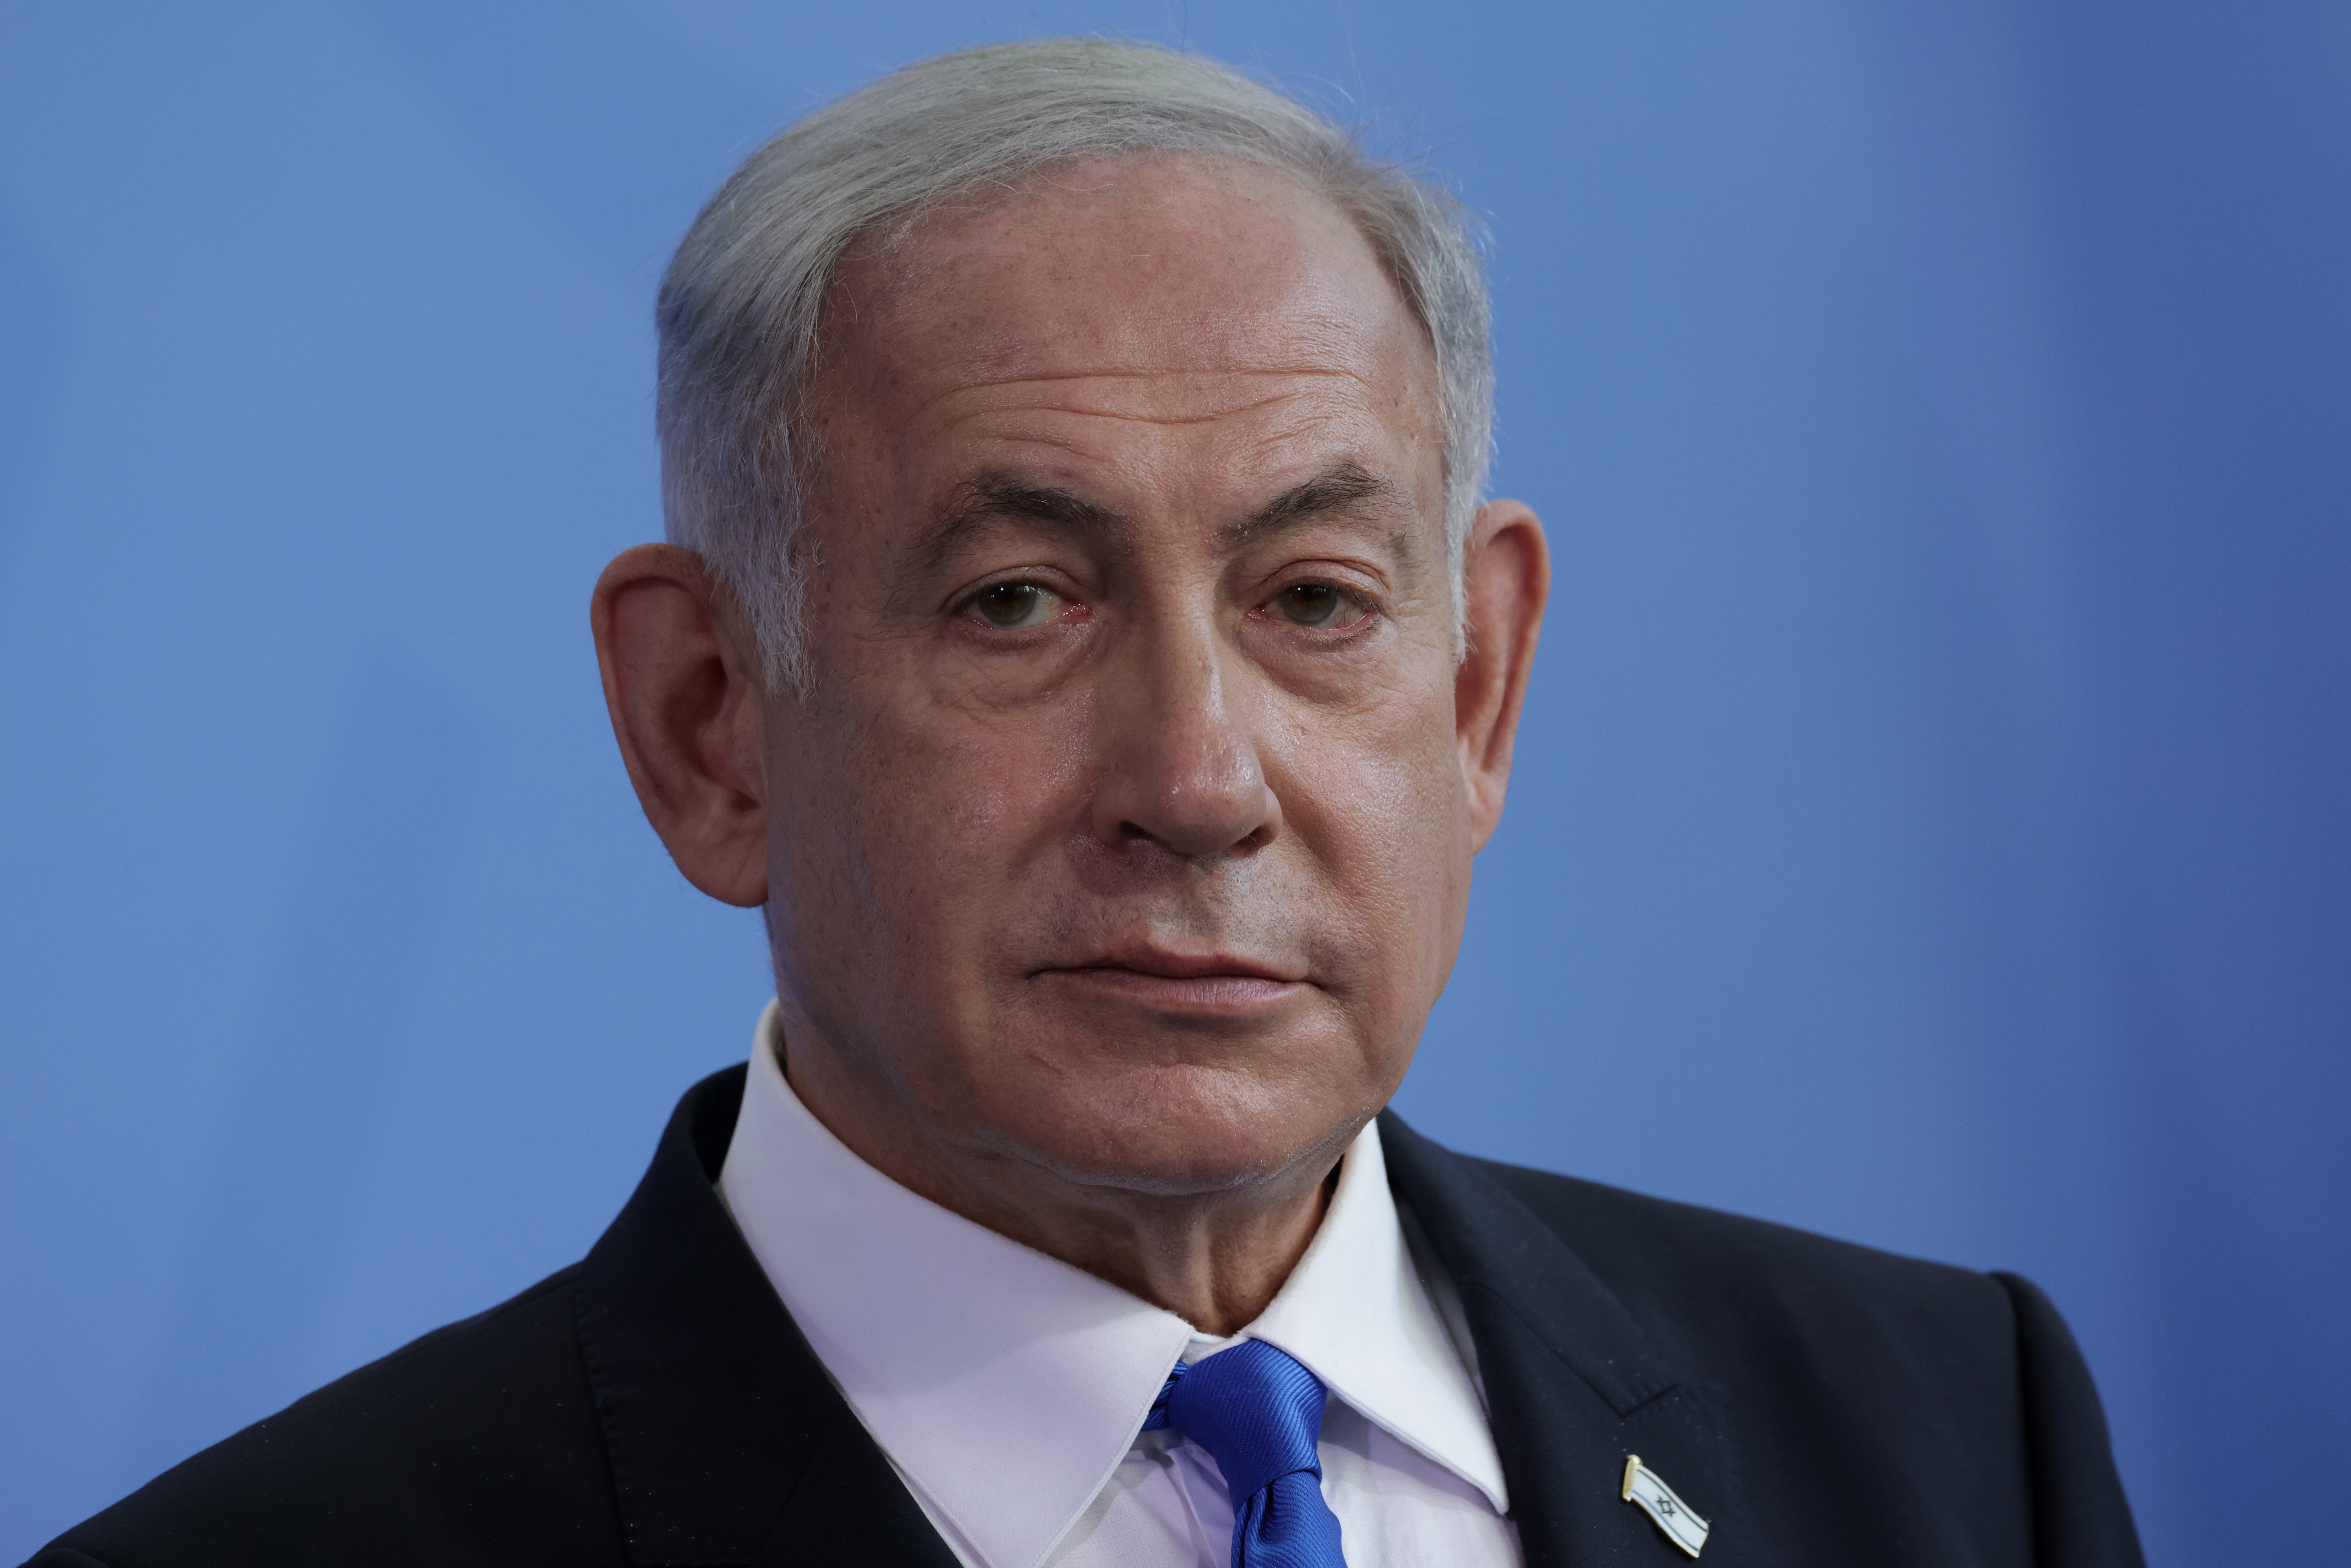 Benjamin Netanyahu, in a black suit, white shirt, and blue tie, looks to the side during a media briefing in Berlin.